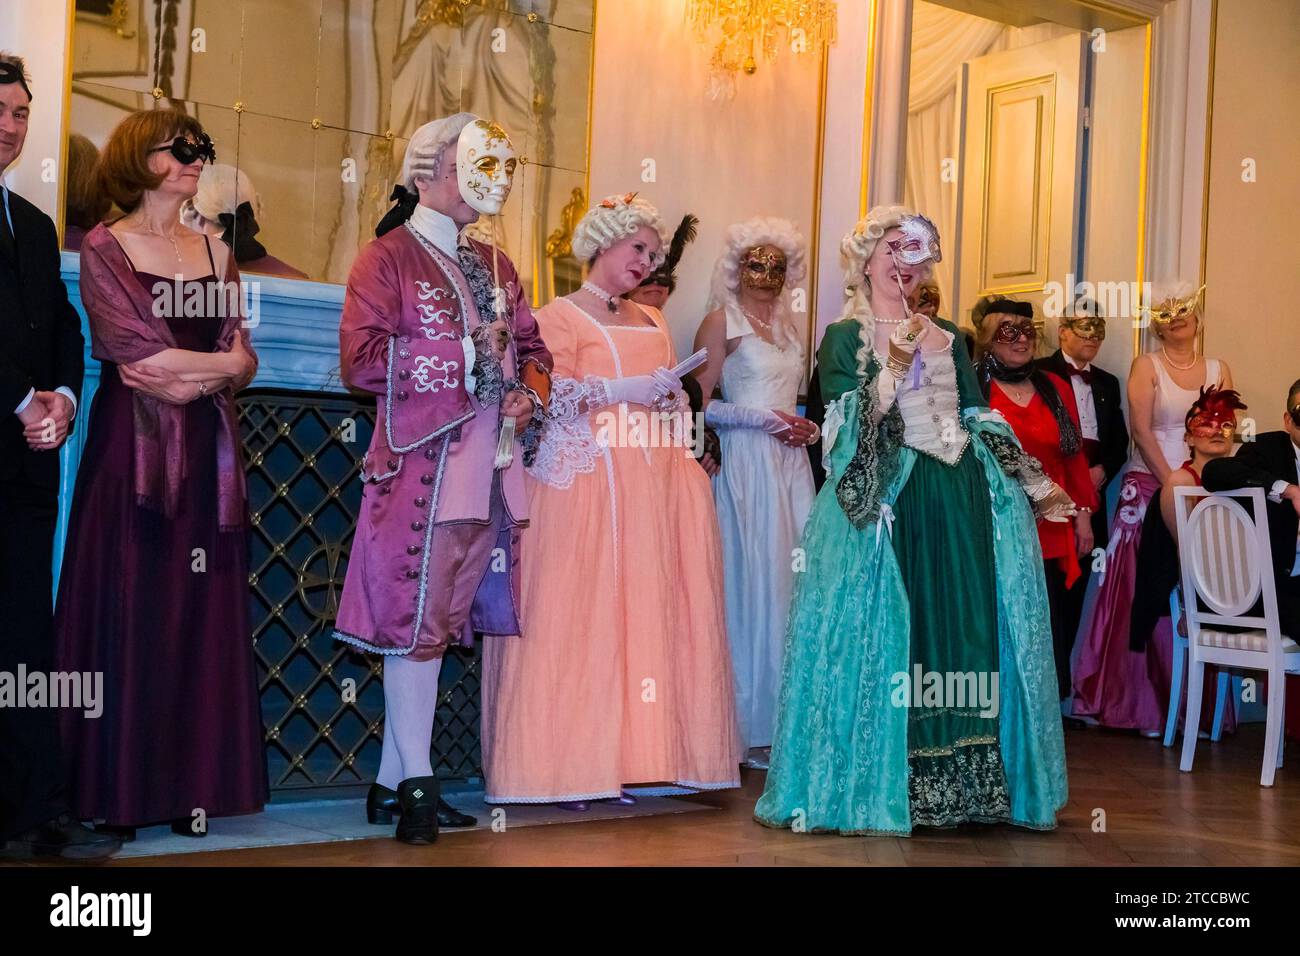 Masquerade ball at Rammenau Baroque Palace, Rammenau Palace in Rammenau near Bischofswerda in the district of Bautzen is one of the most beautiful Stock Photo